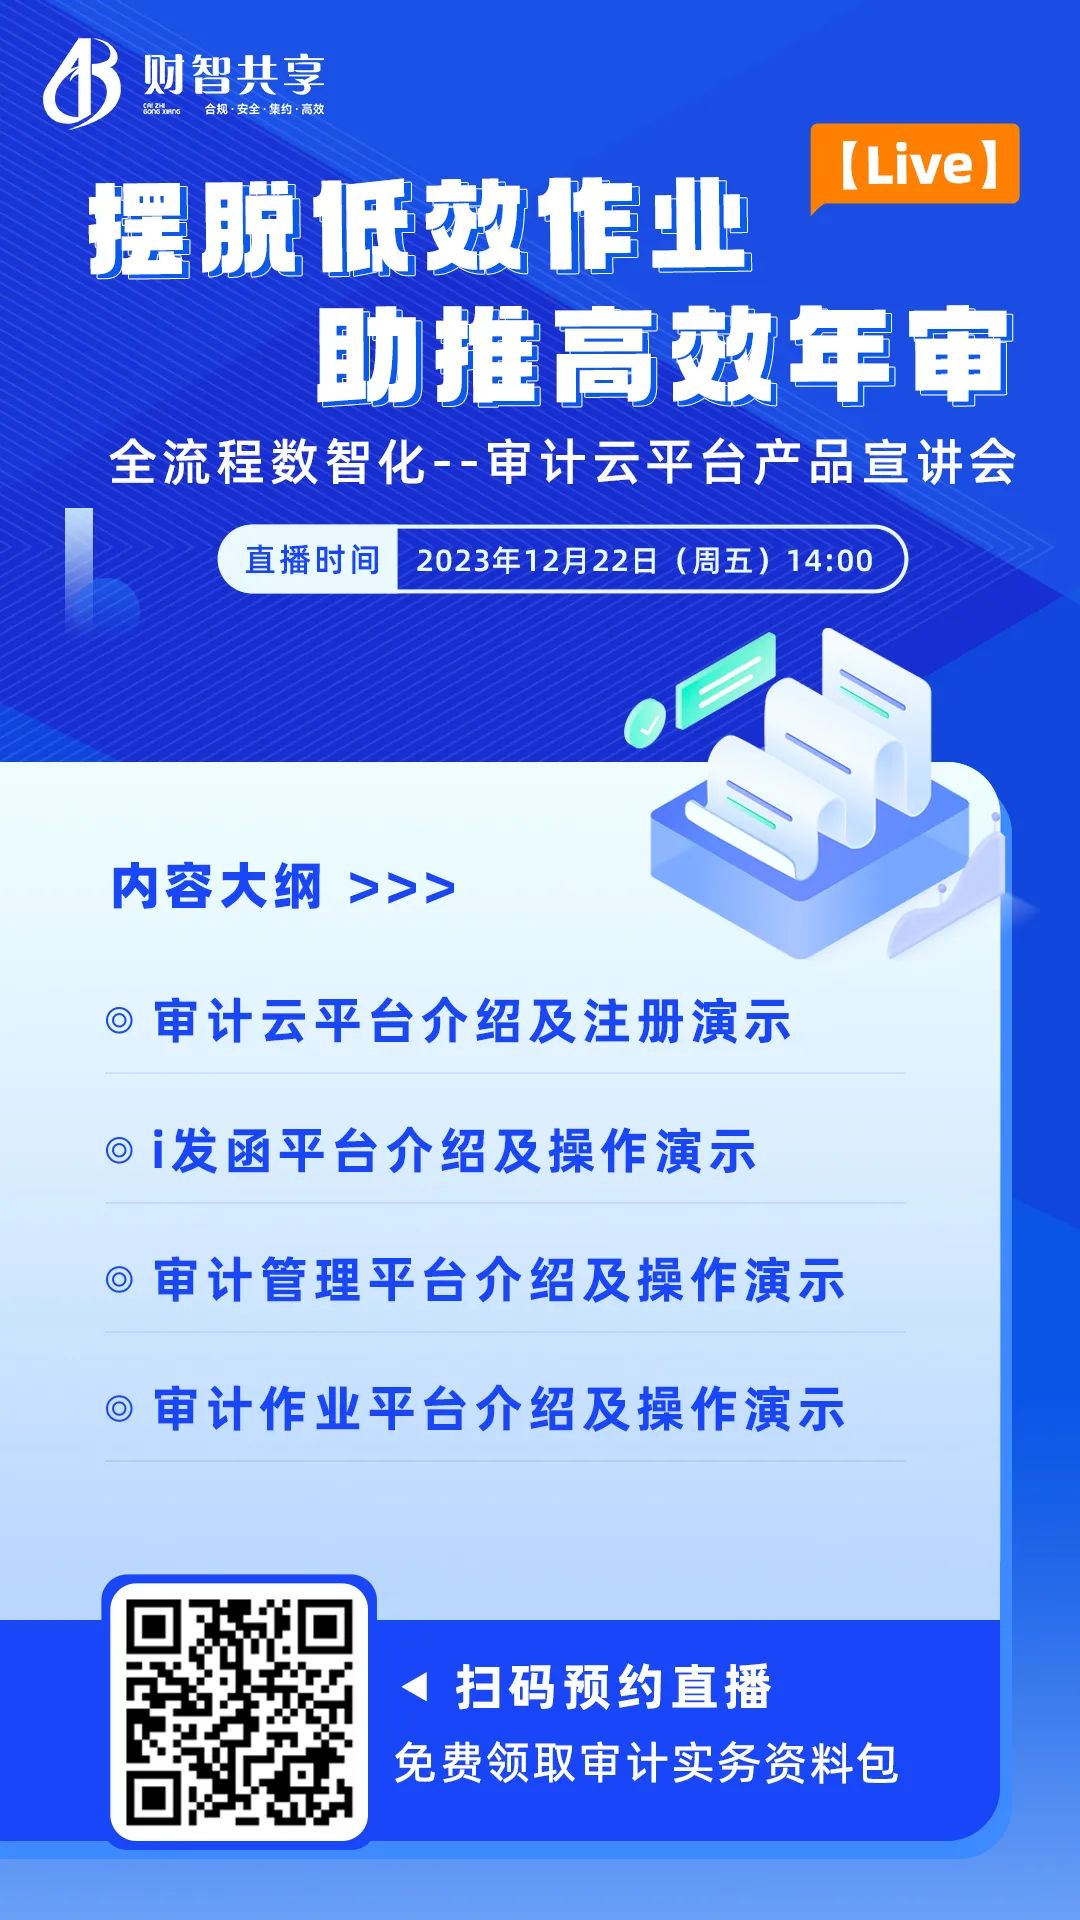 https://client-download-pre.obs.cn-north-4.myhuaweicloud.com/official/pro/899088700082884608.jpg